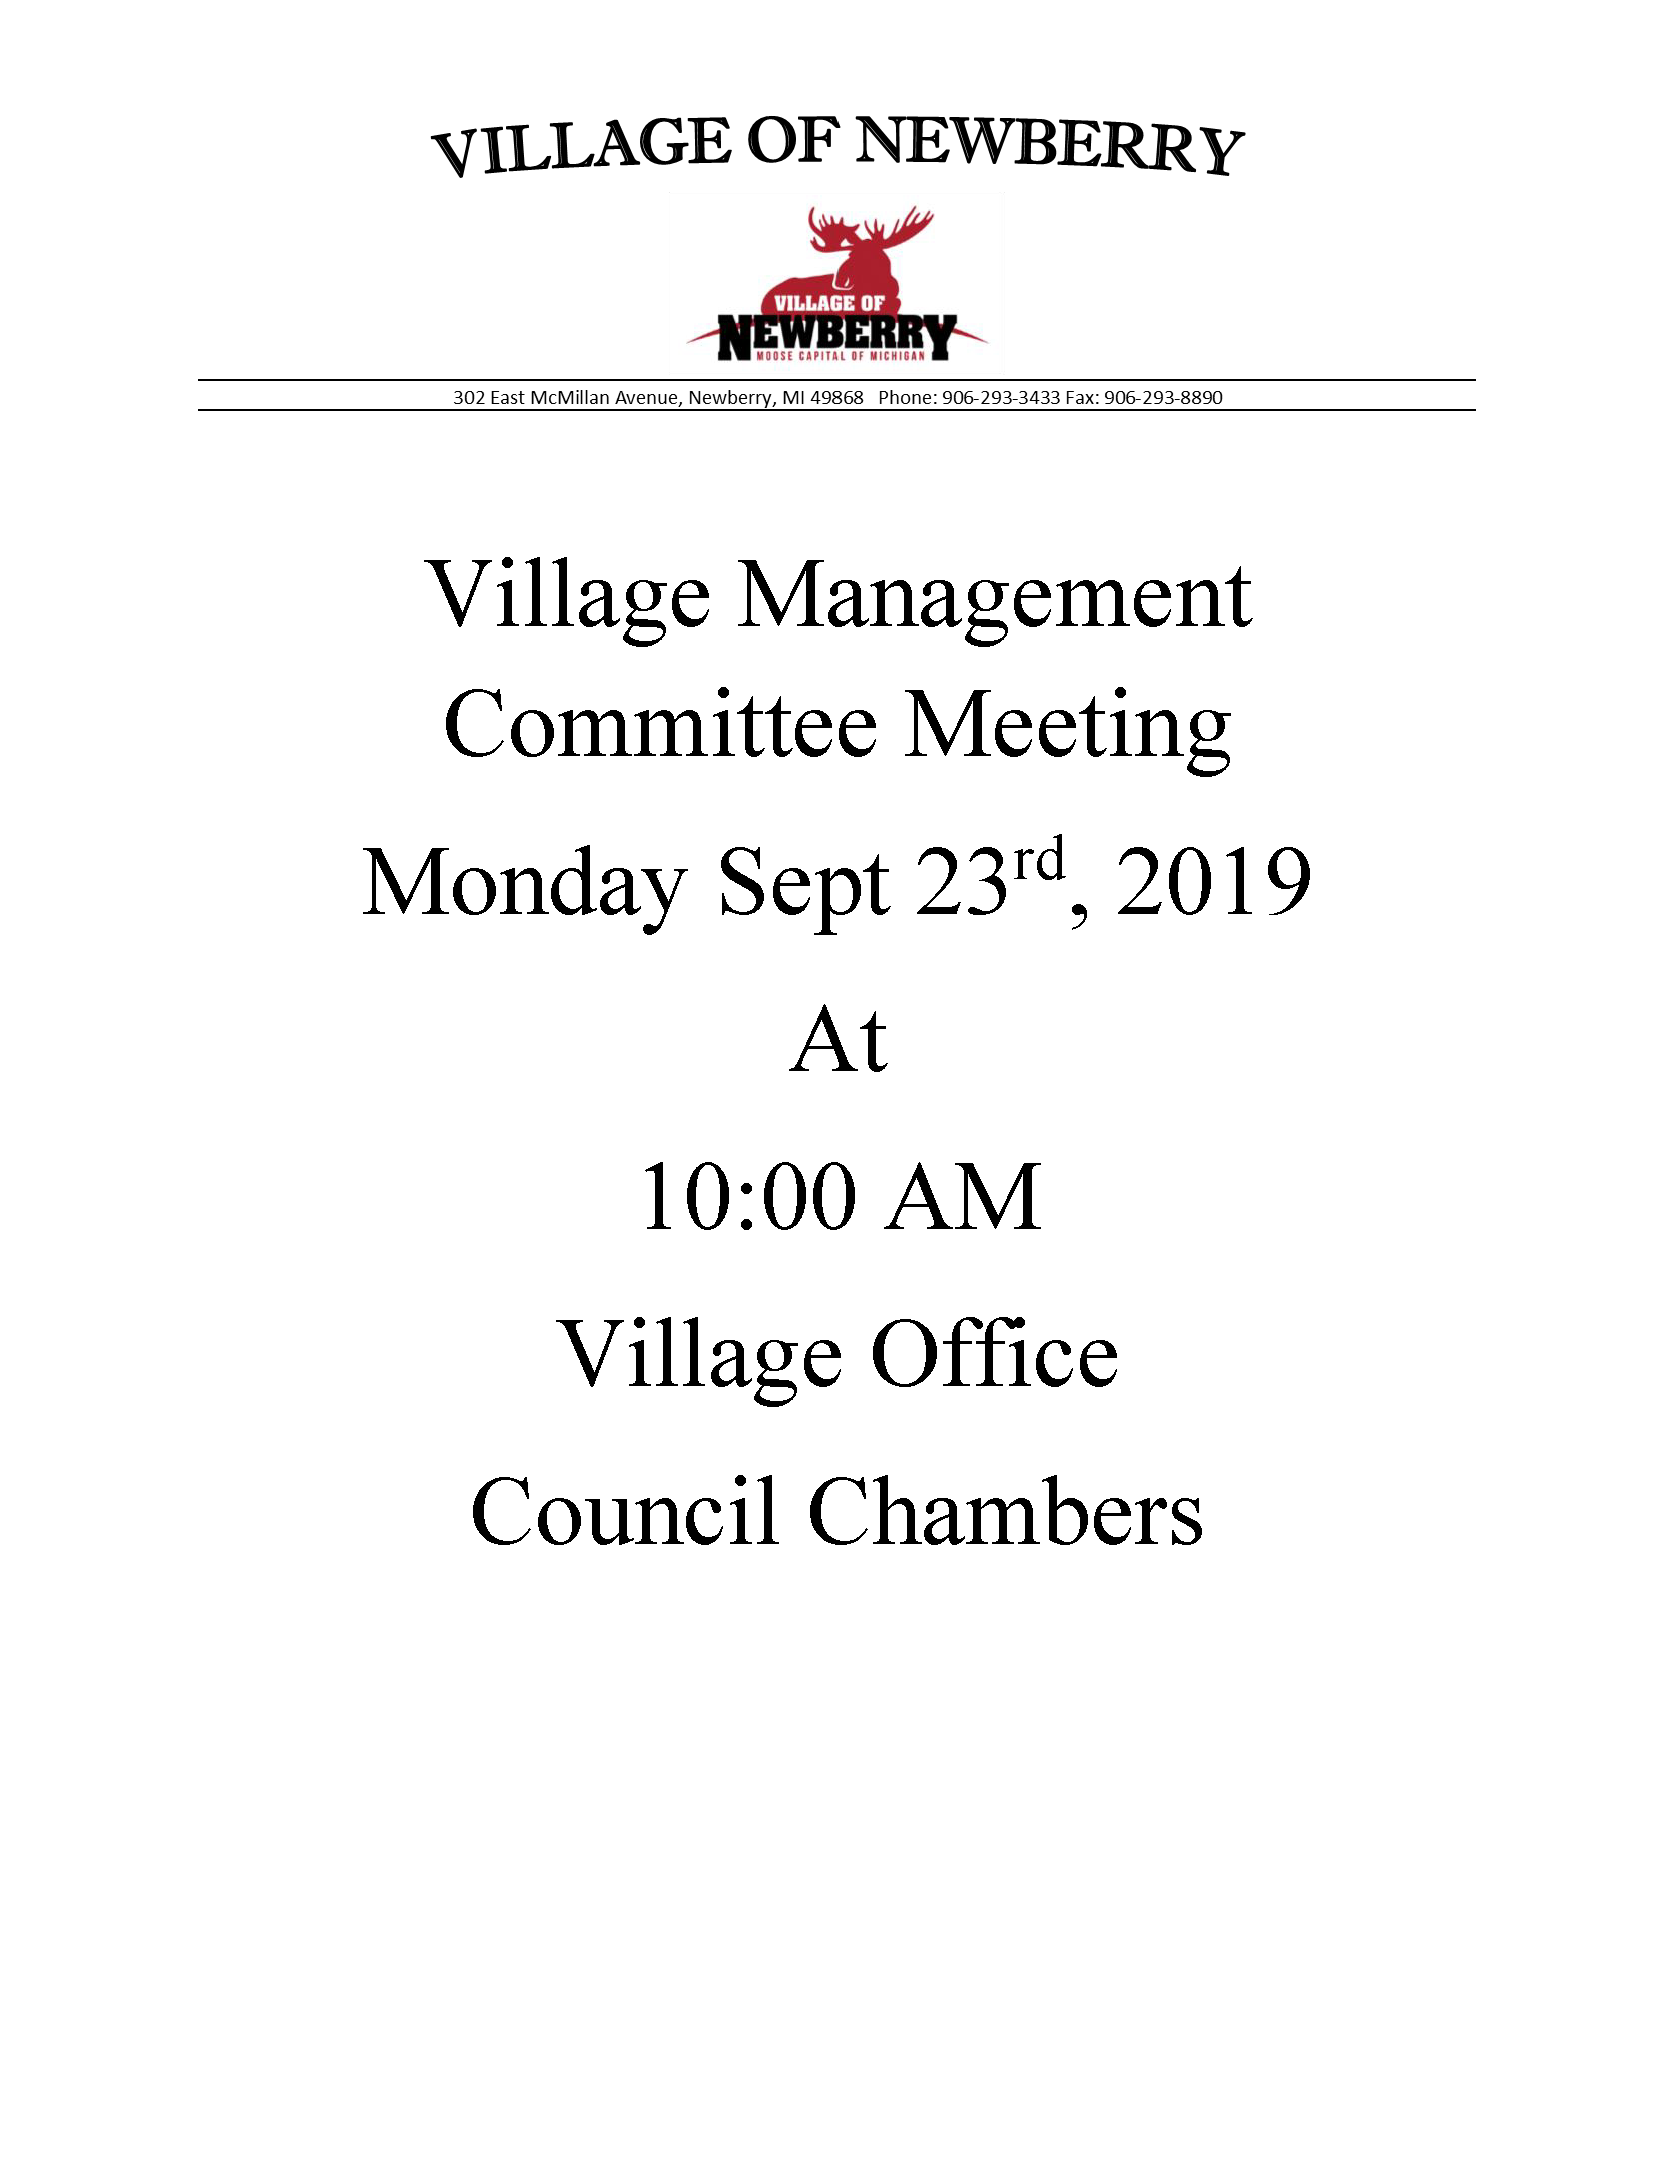 Management Committe Meeting 9-23-19